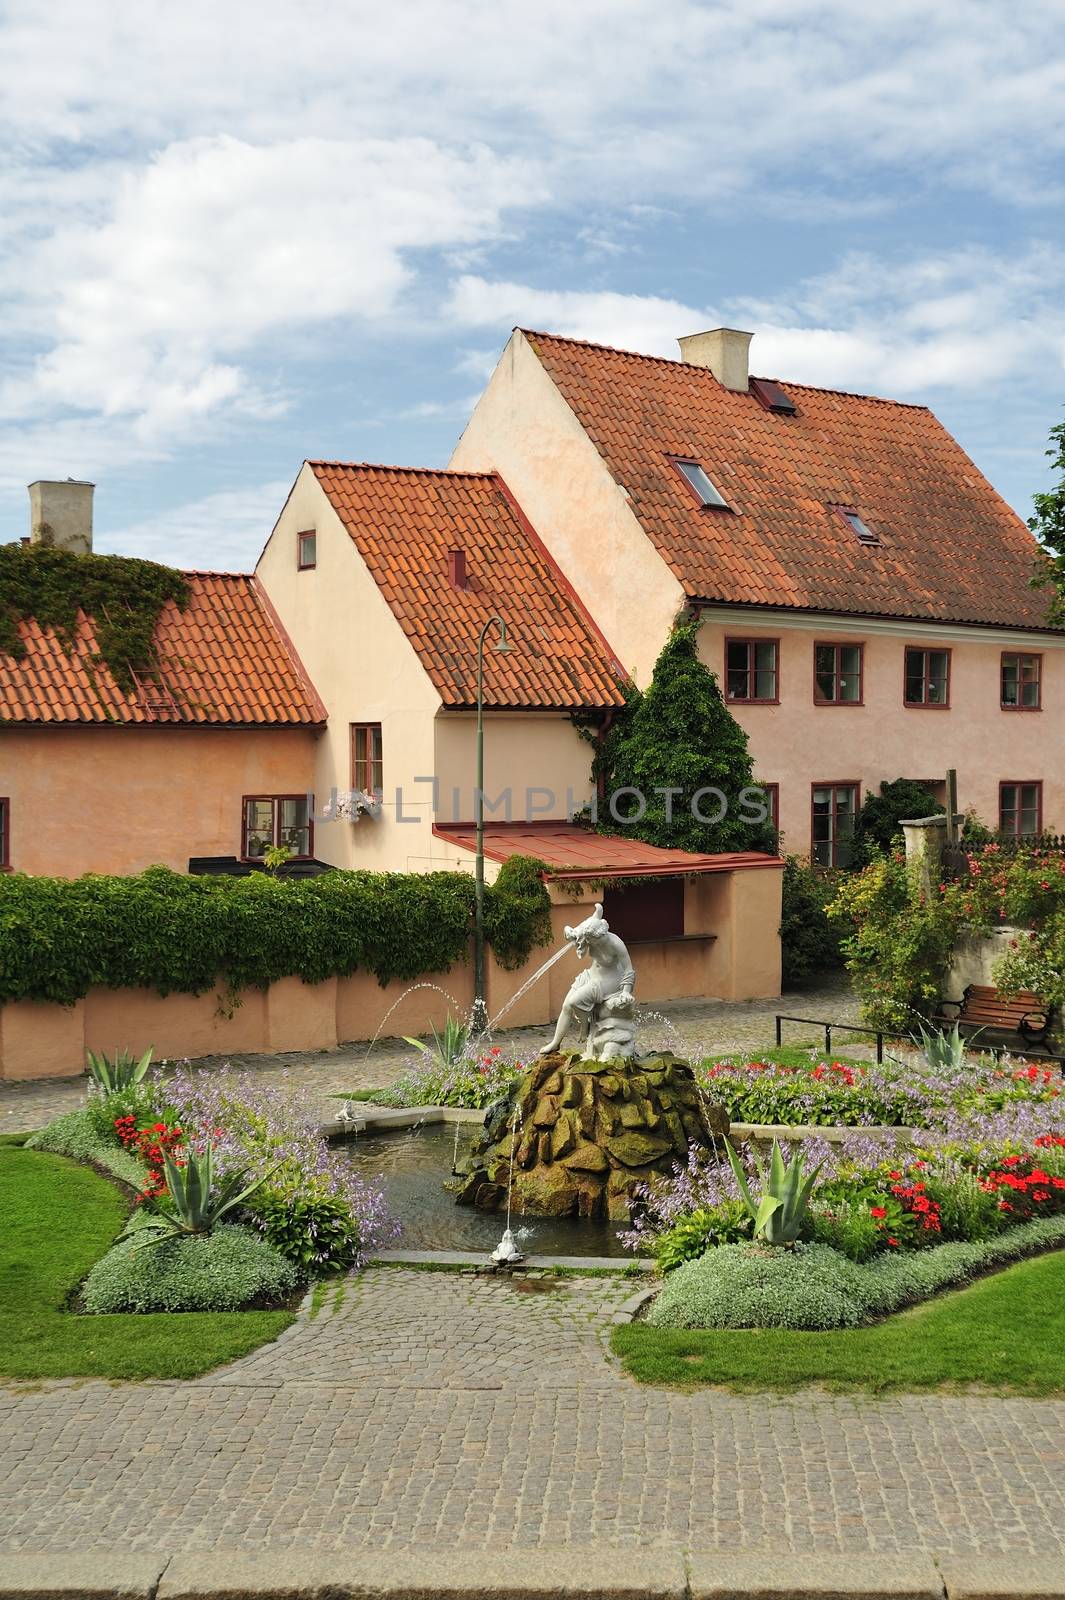 Packhusplan, is a square in Visby, at the end of the 1800s prepared a small plantation with a fountain and the bronze sculpture cornucopia goddess.